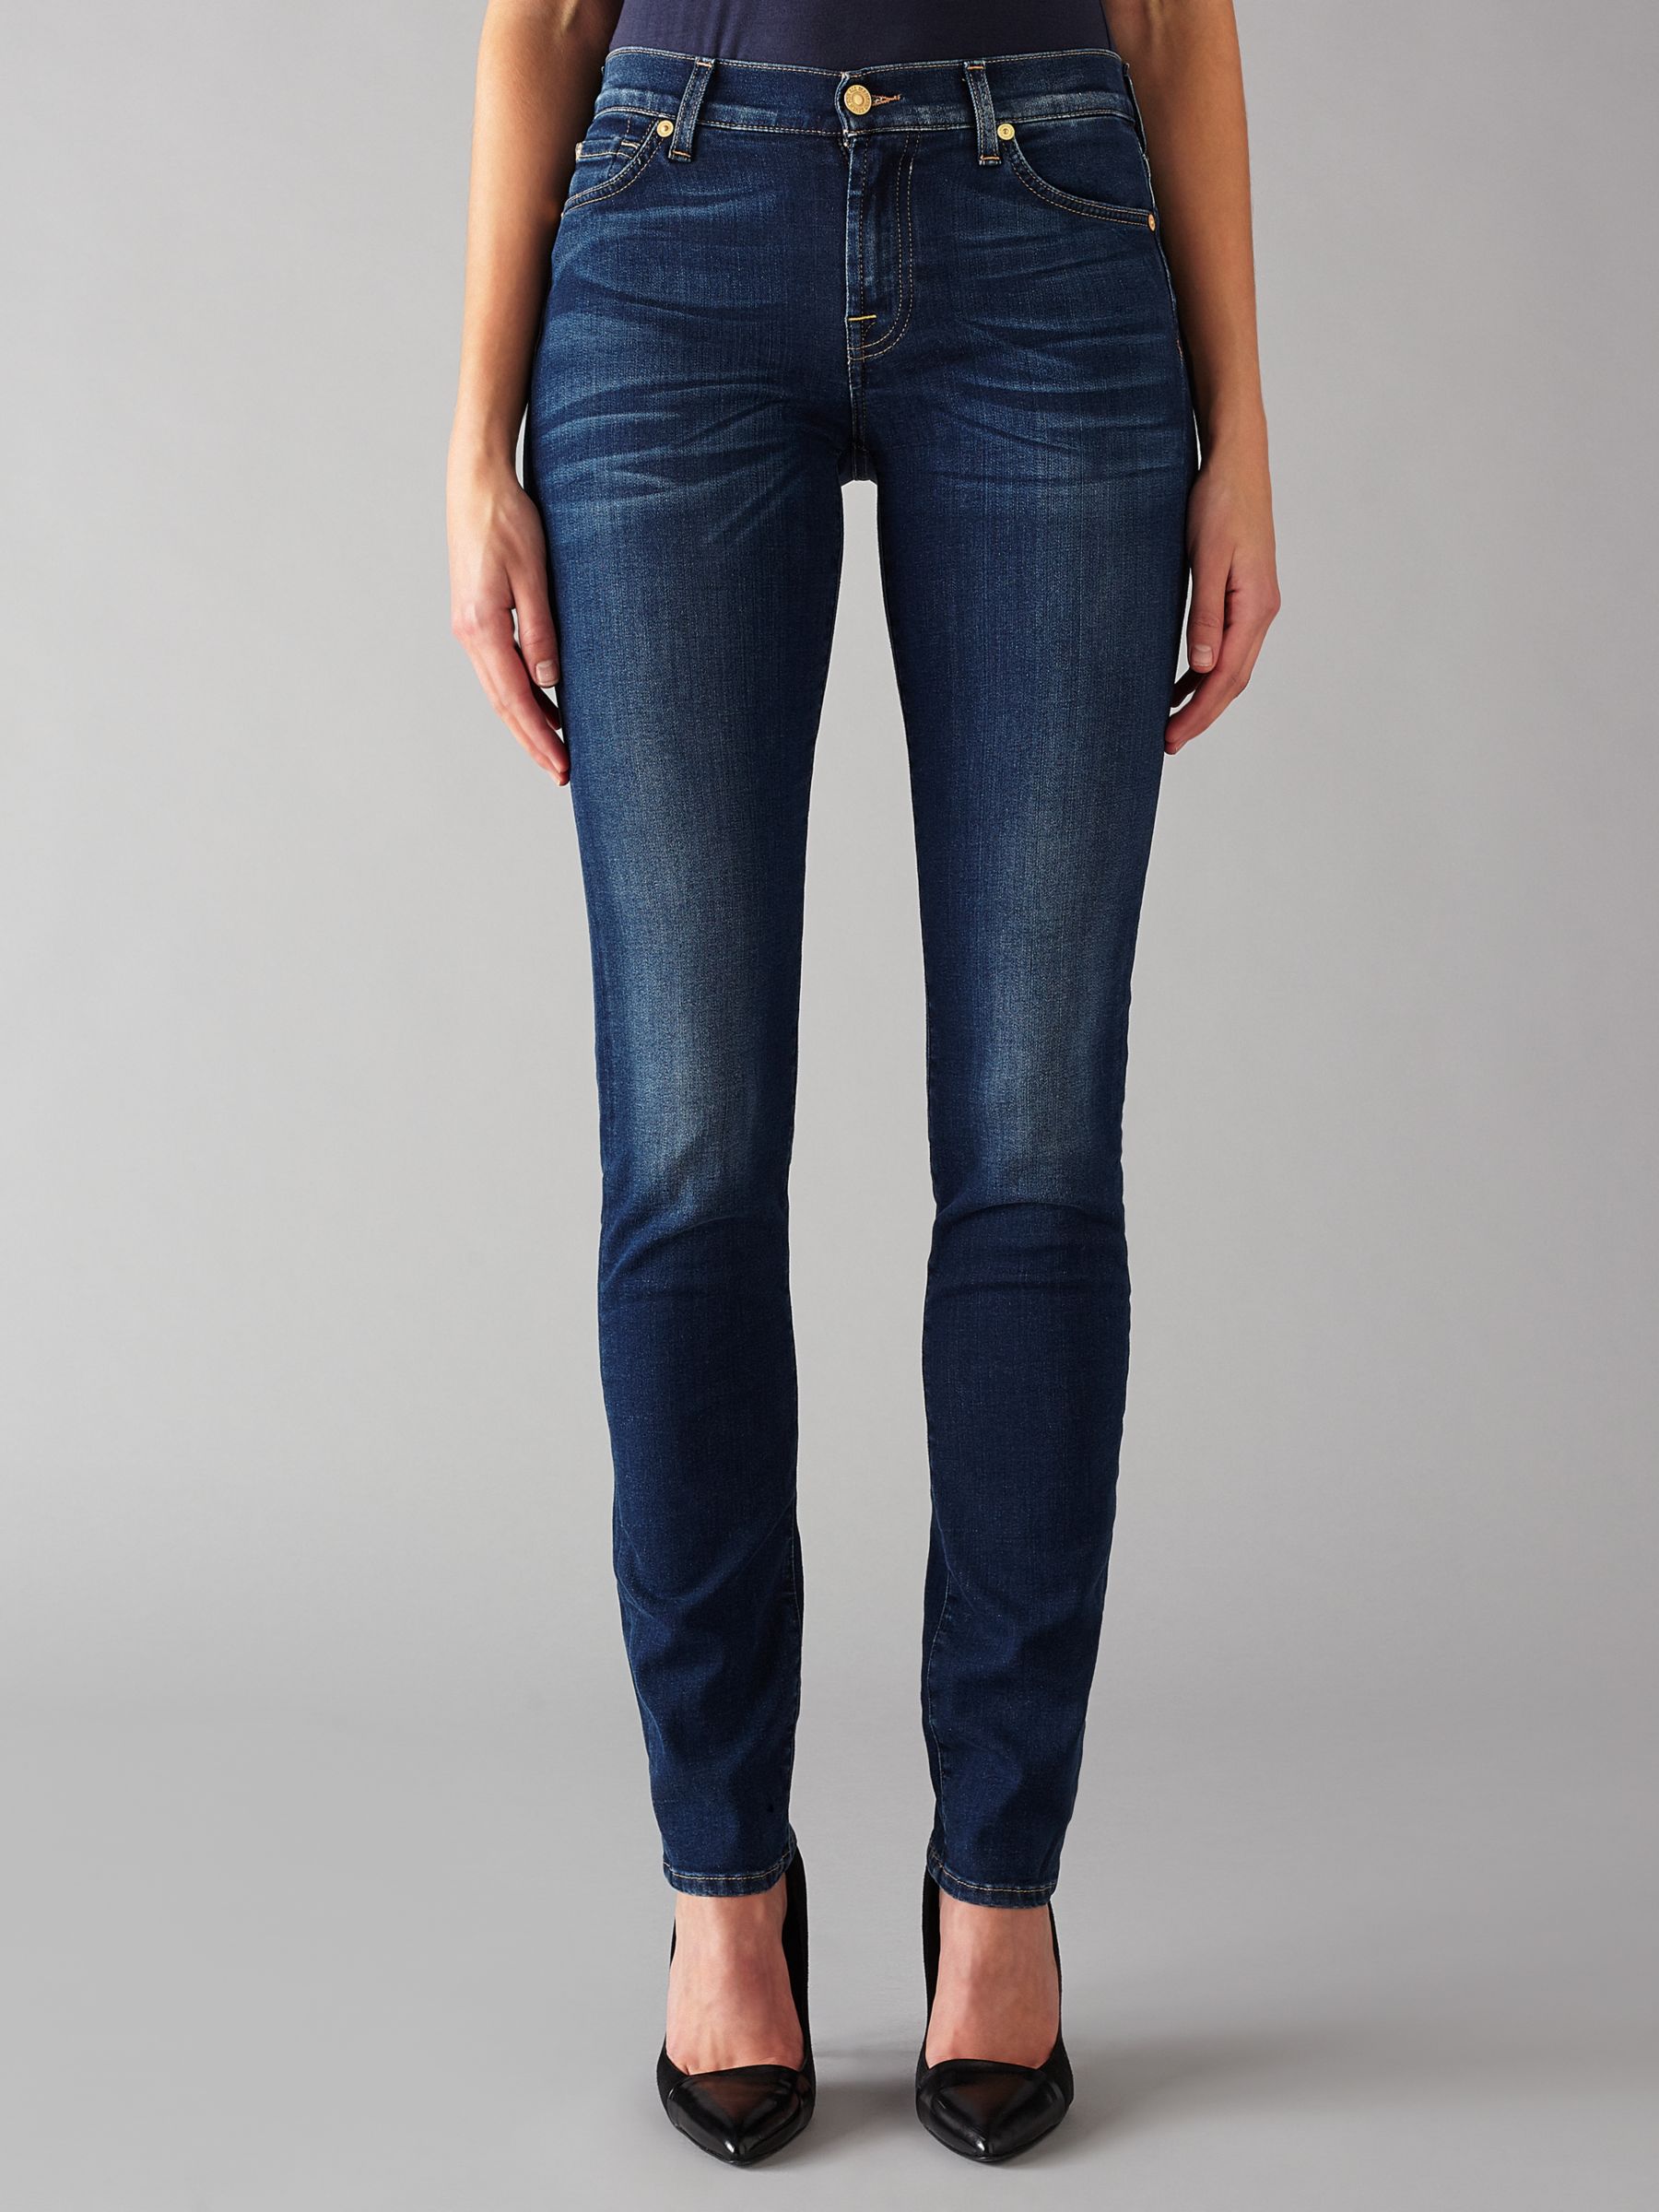 7 For All Mankind Roxanne Mid Rise B Air Slim Jeans Duchess At John Lewis Partners